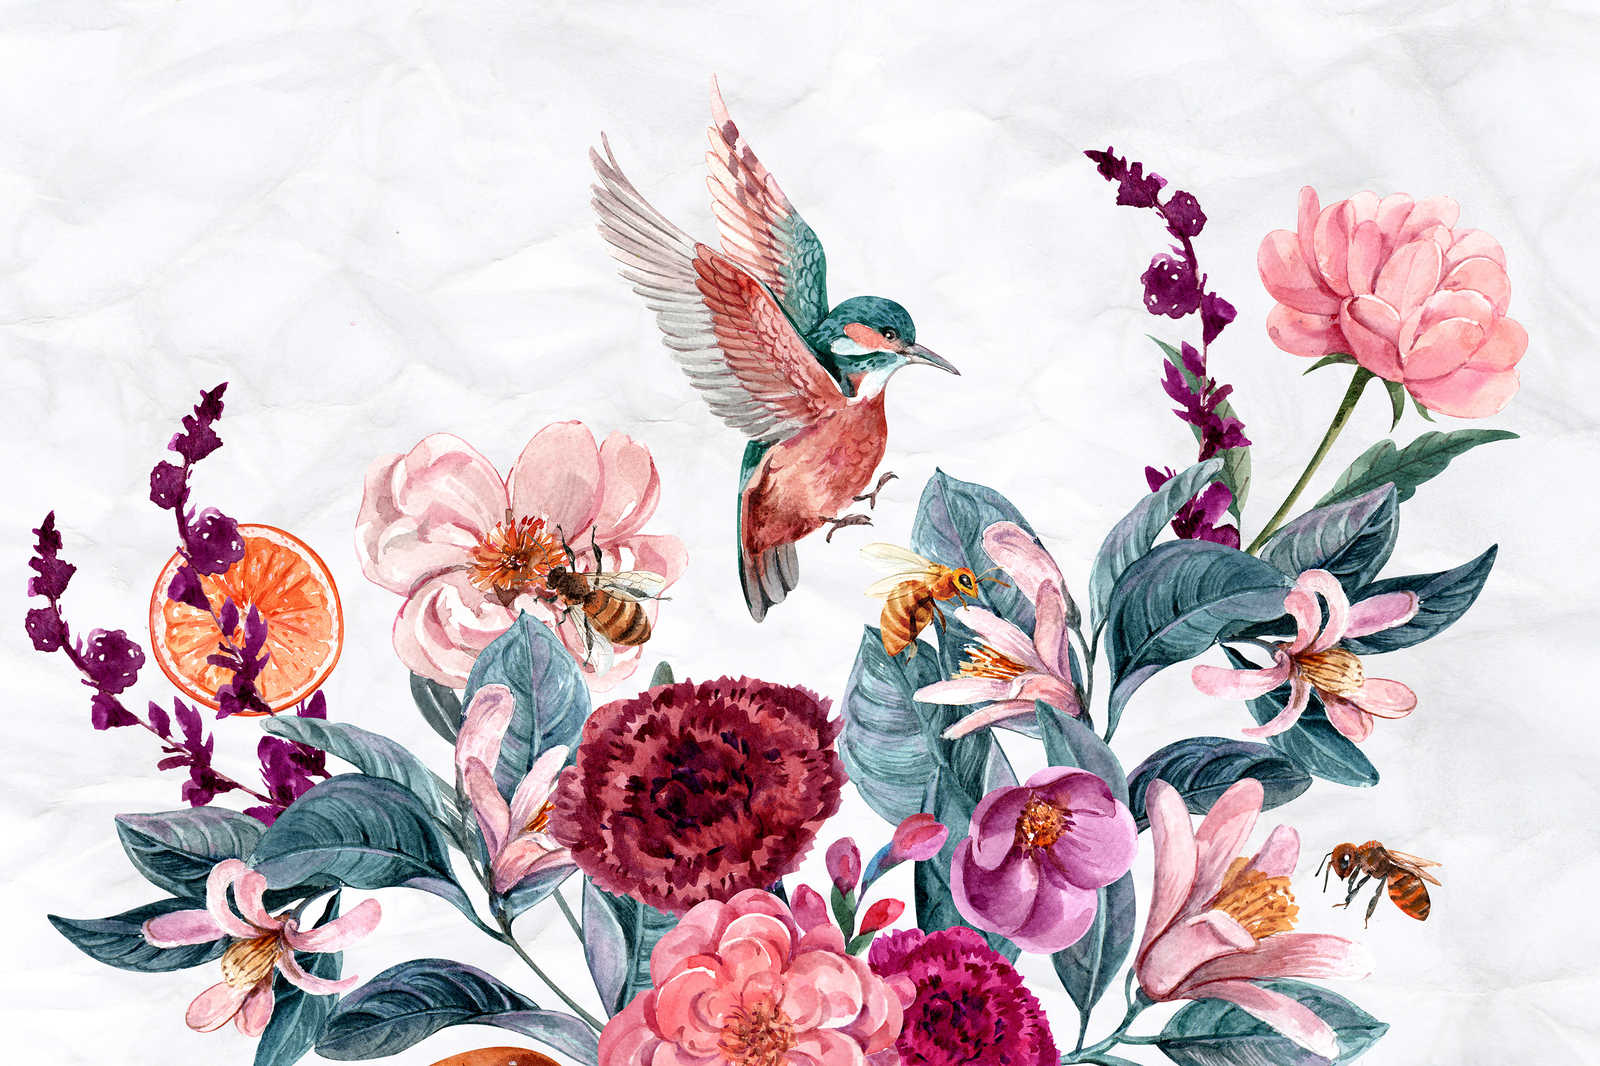             Canvas painting Flowers & Birds on 3D Background - 0,90 m x 0,60 m
        